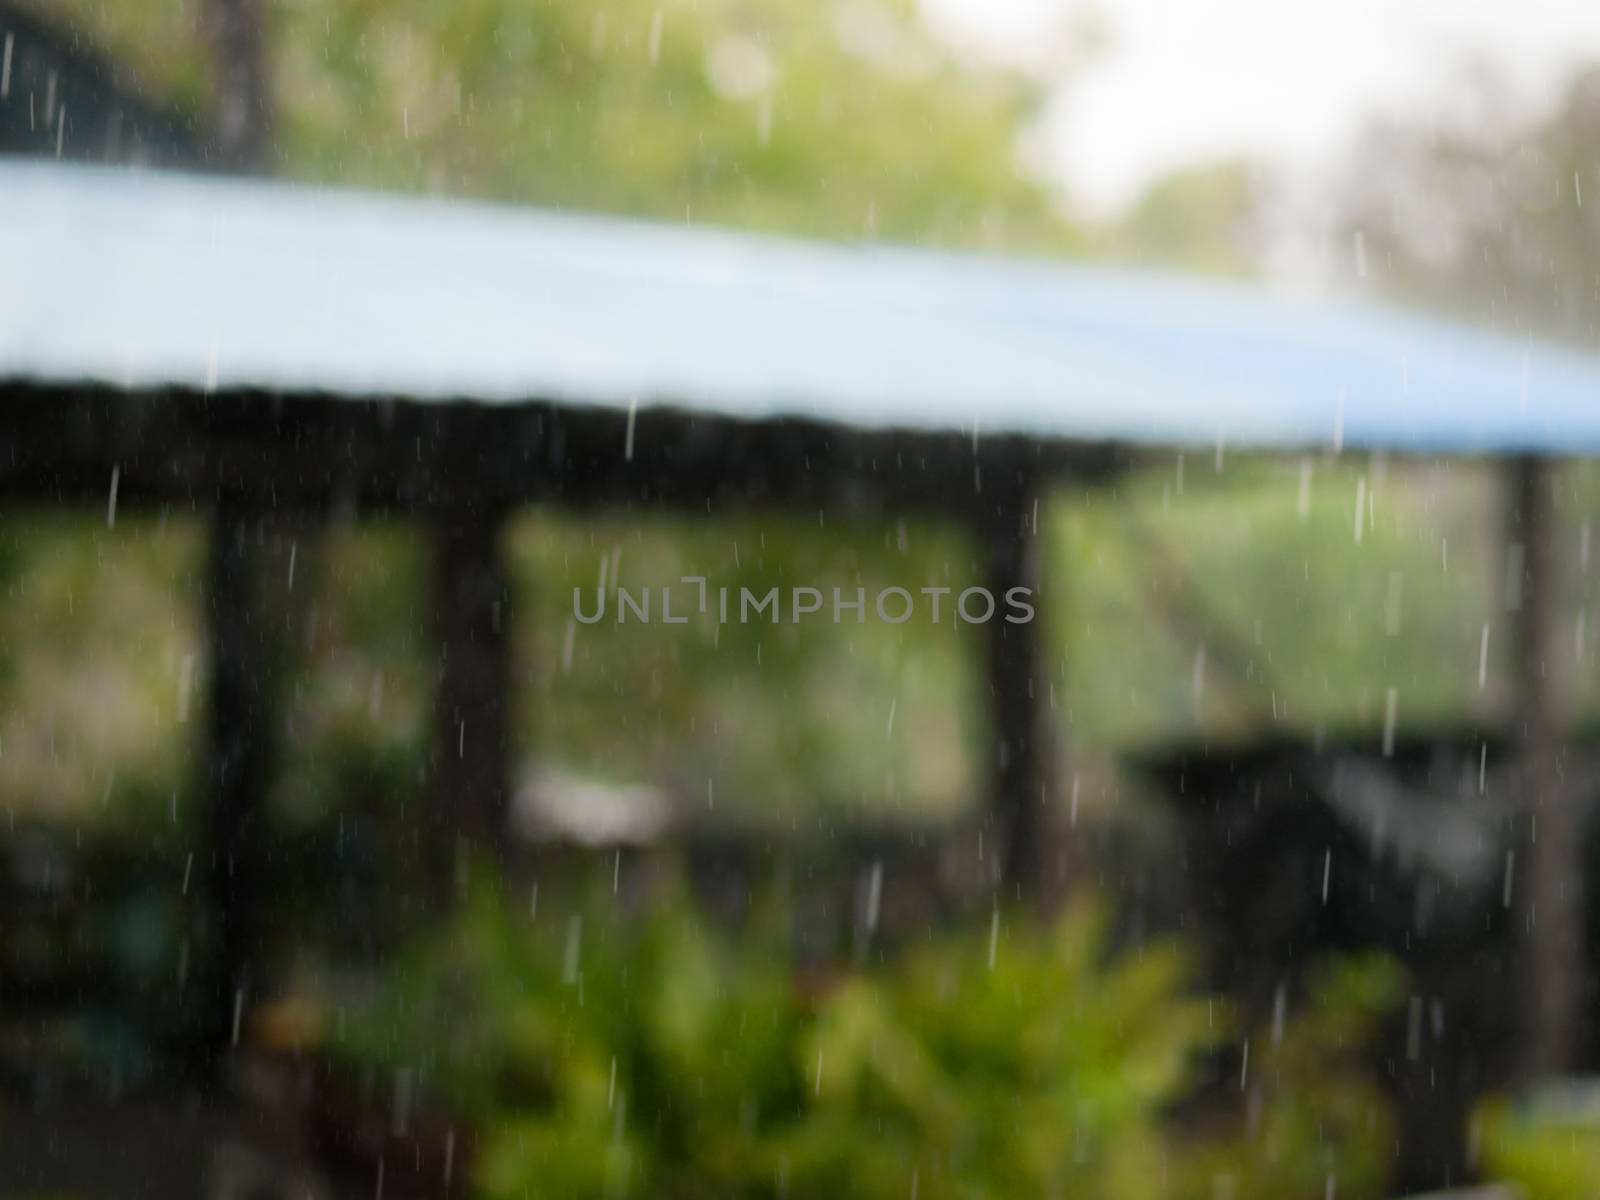 COLOR PHOTO OF BLURRY SHOT OF RAINDROPS